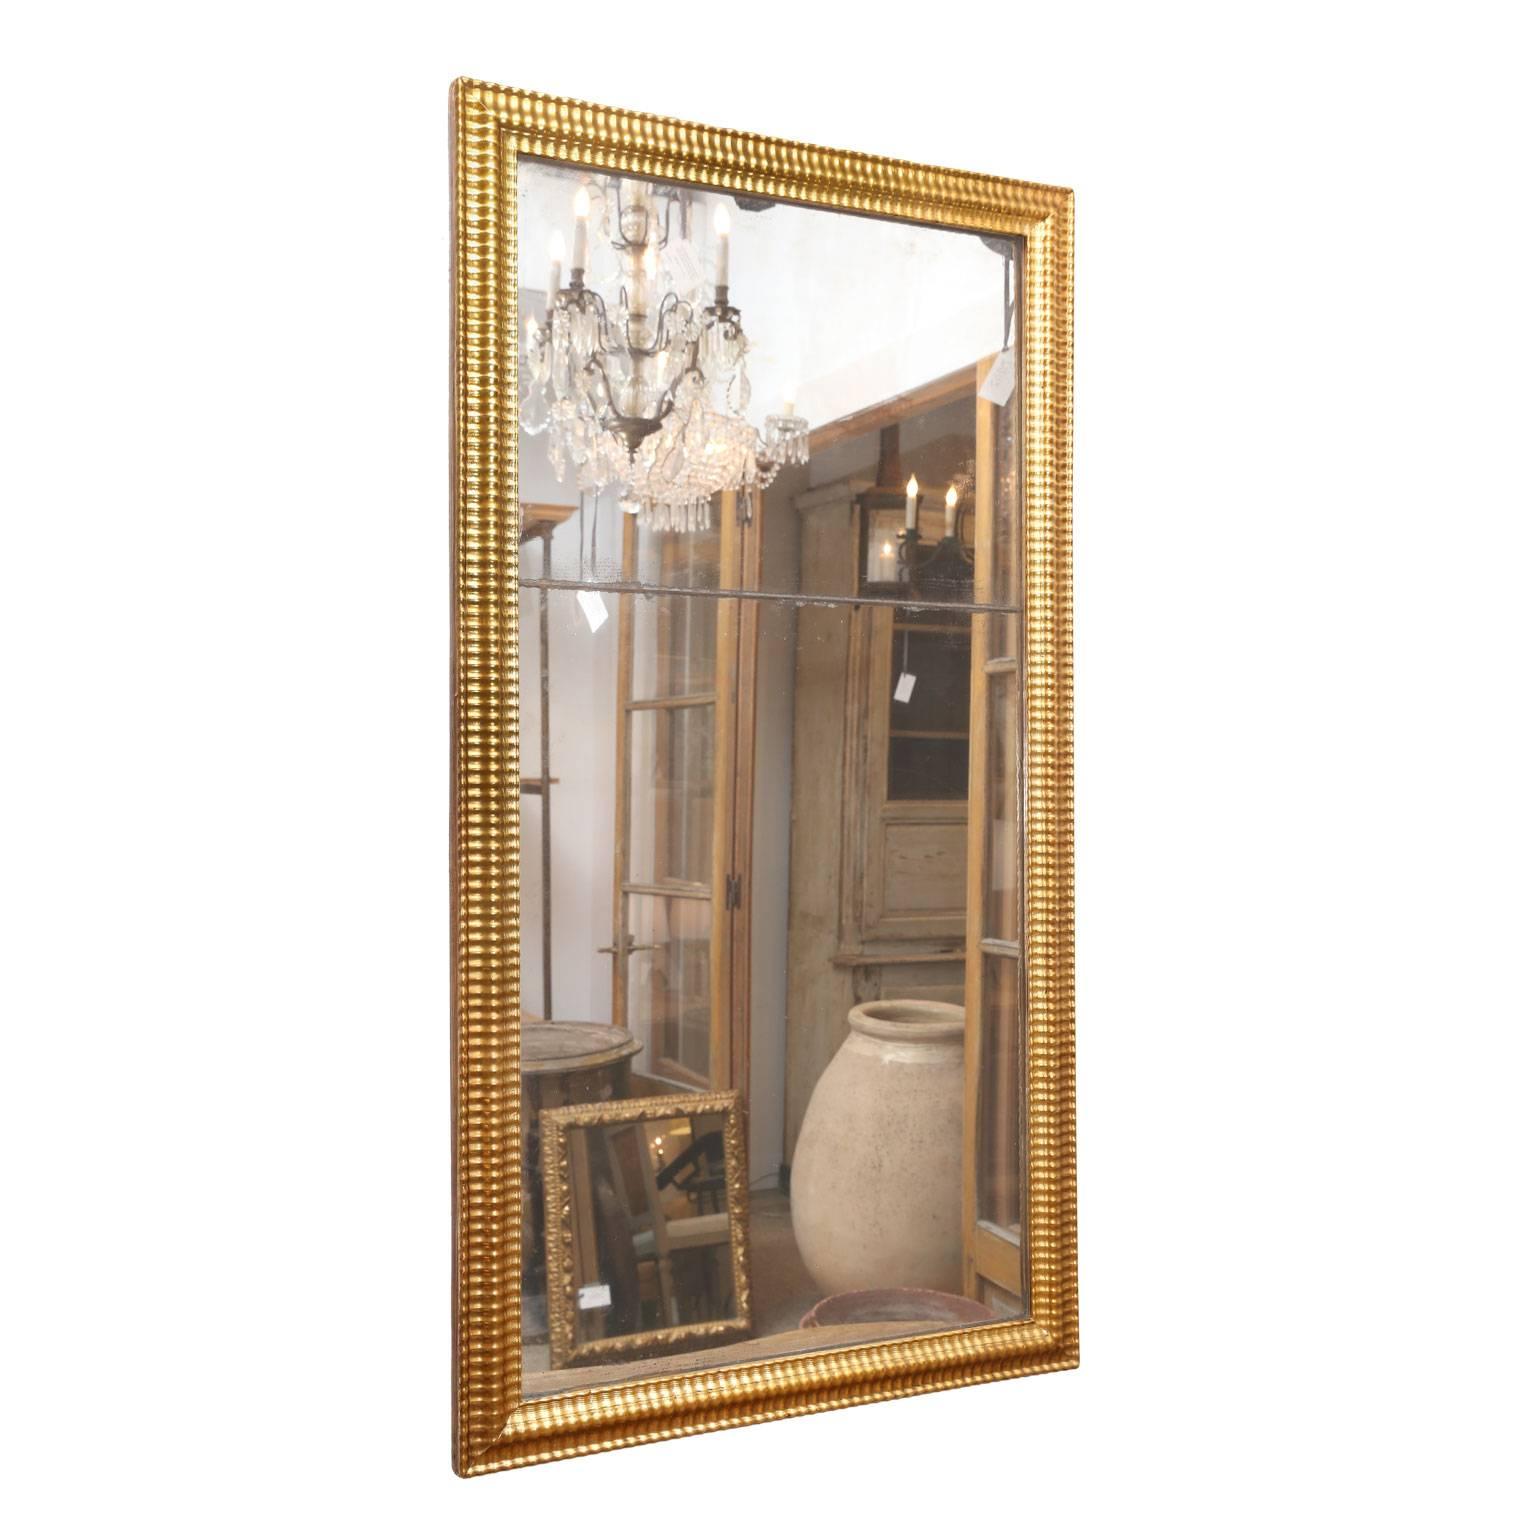 Louis XVI giltwood mirror, two tones of gilding adorn frame surrounding a bipartite mirror plate. Mirror’s reflection is near-pristine with only a few age spots. Subtle amounts of diamond dust cluster around mirror’s edges and joint where the two